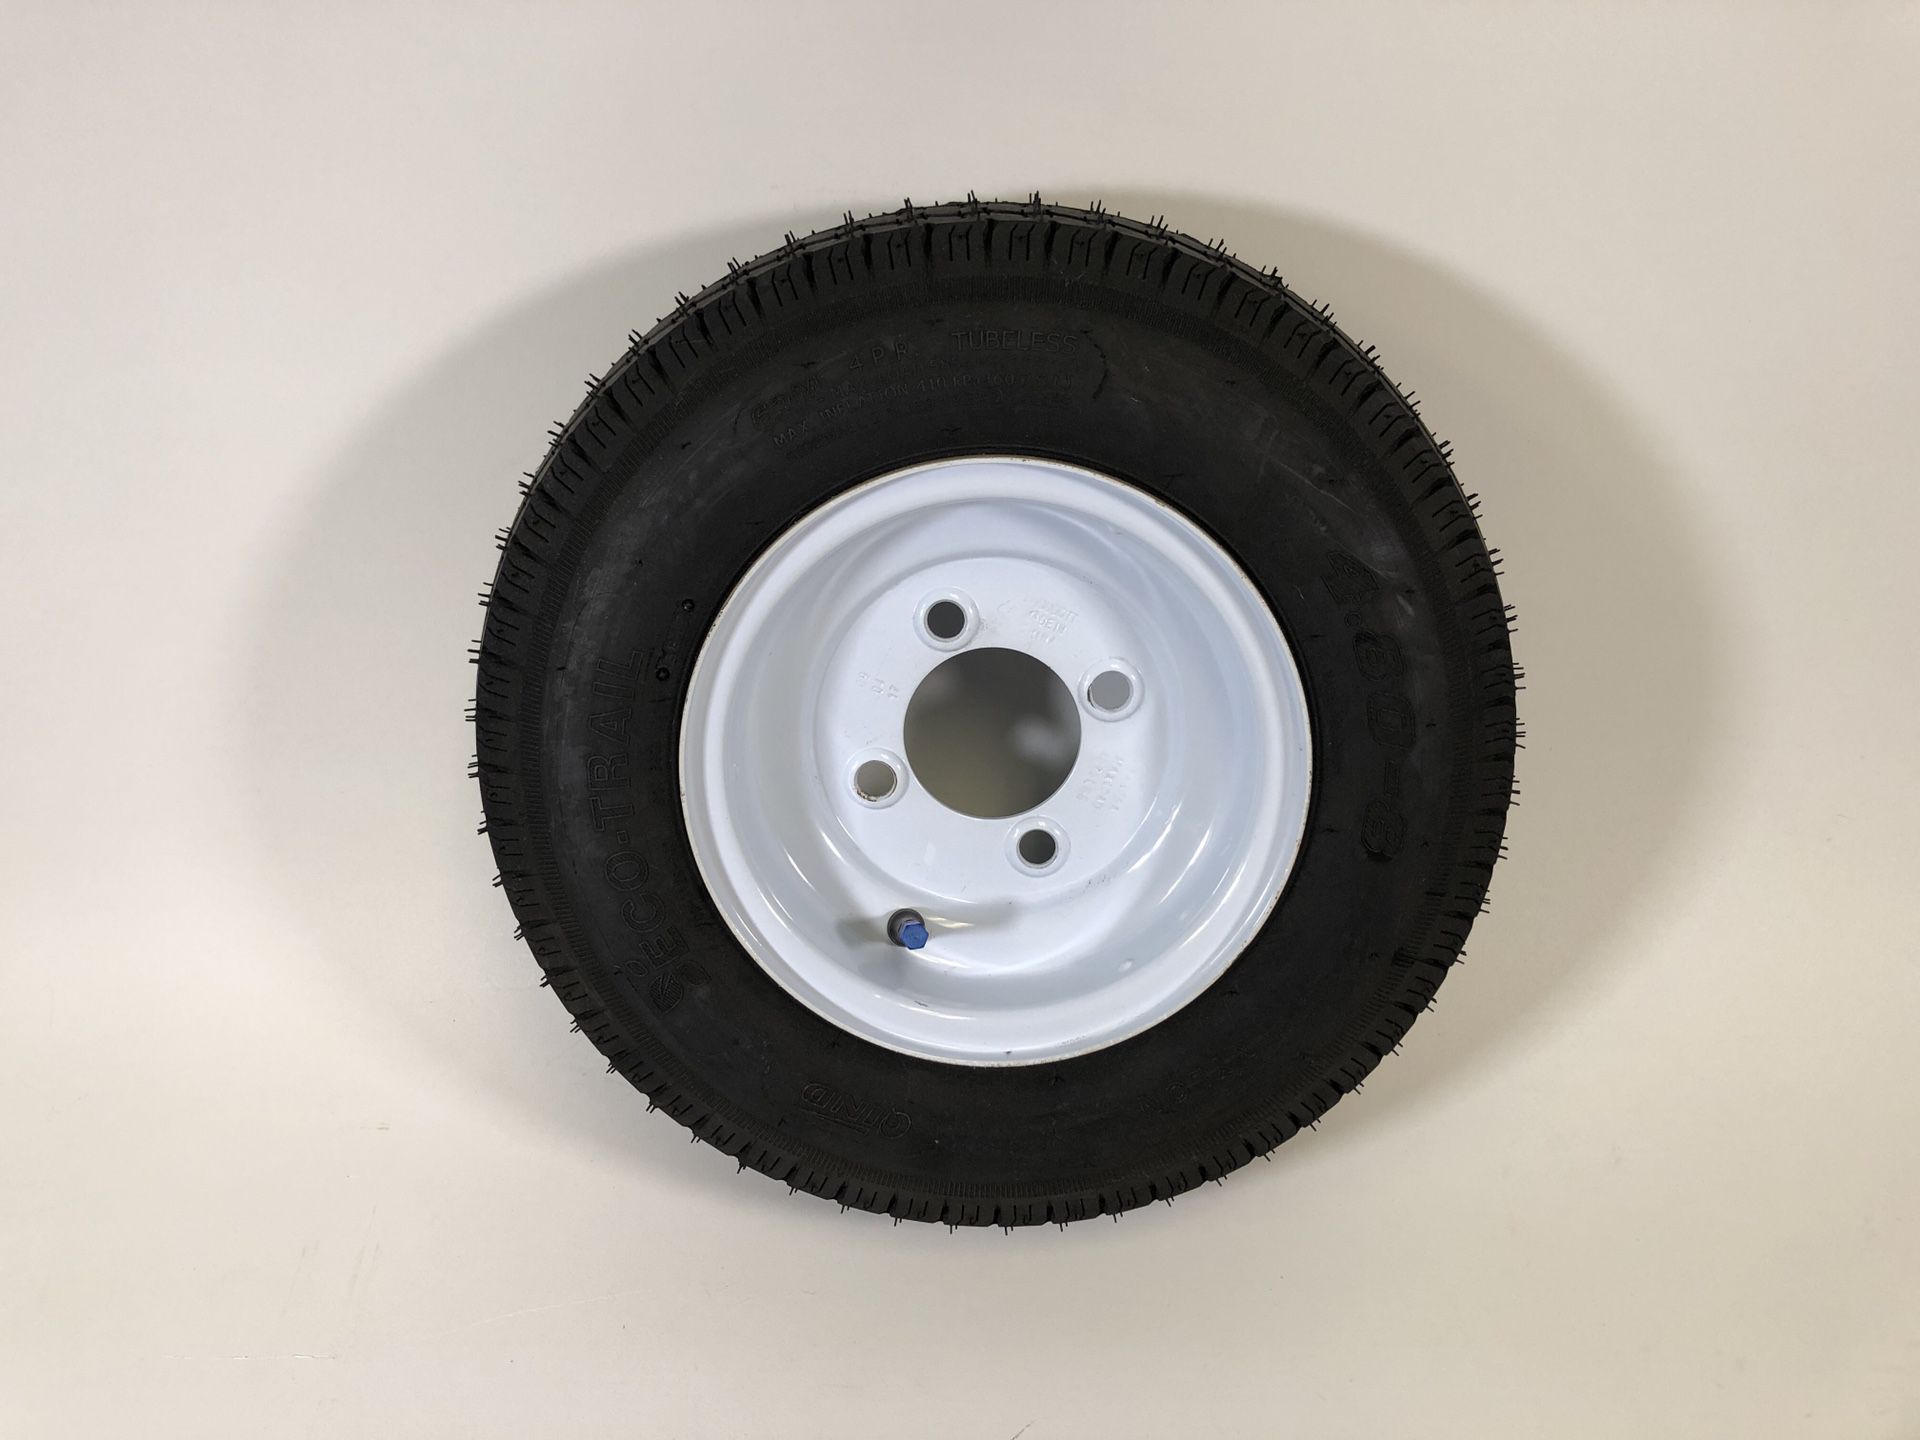 8” Trailer Tire and Rim - Brand New - Hot Dog Cart Parts